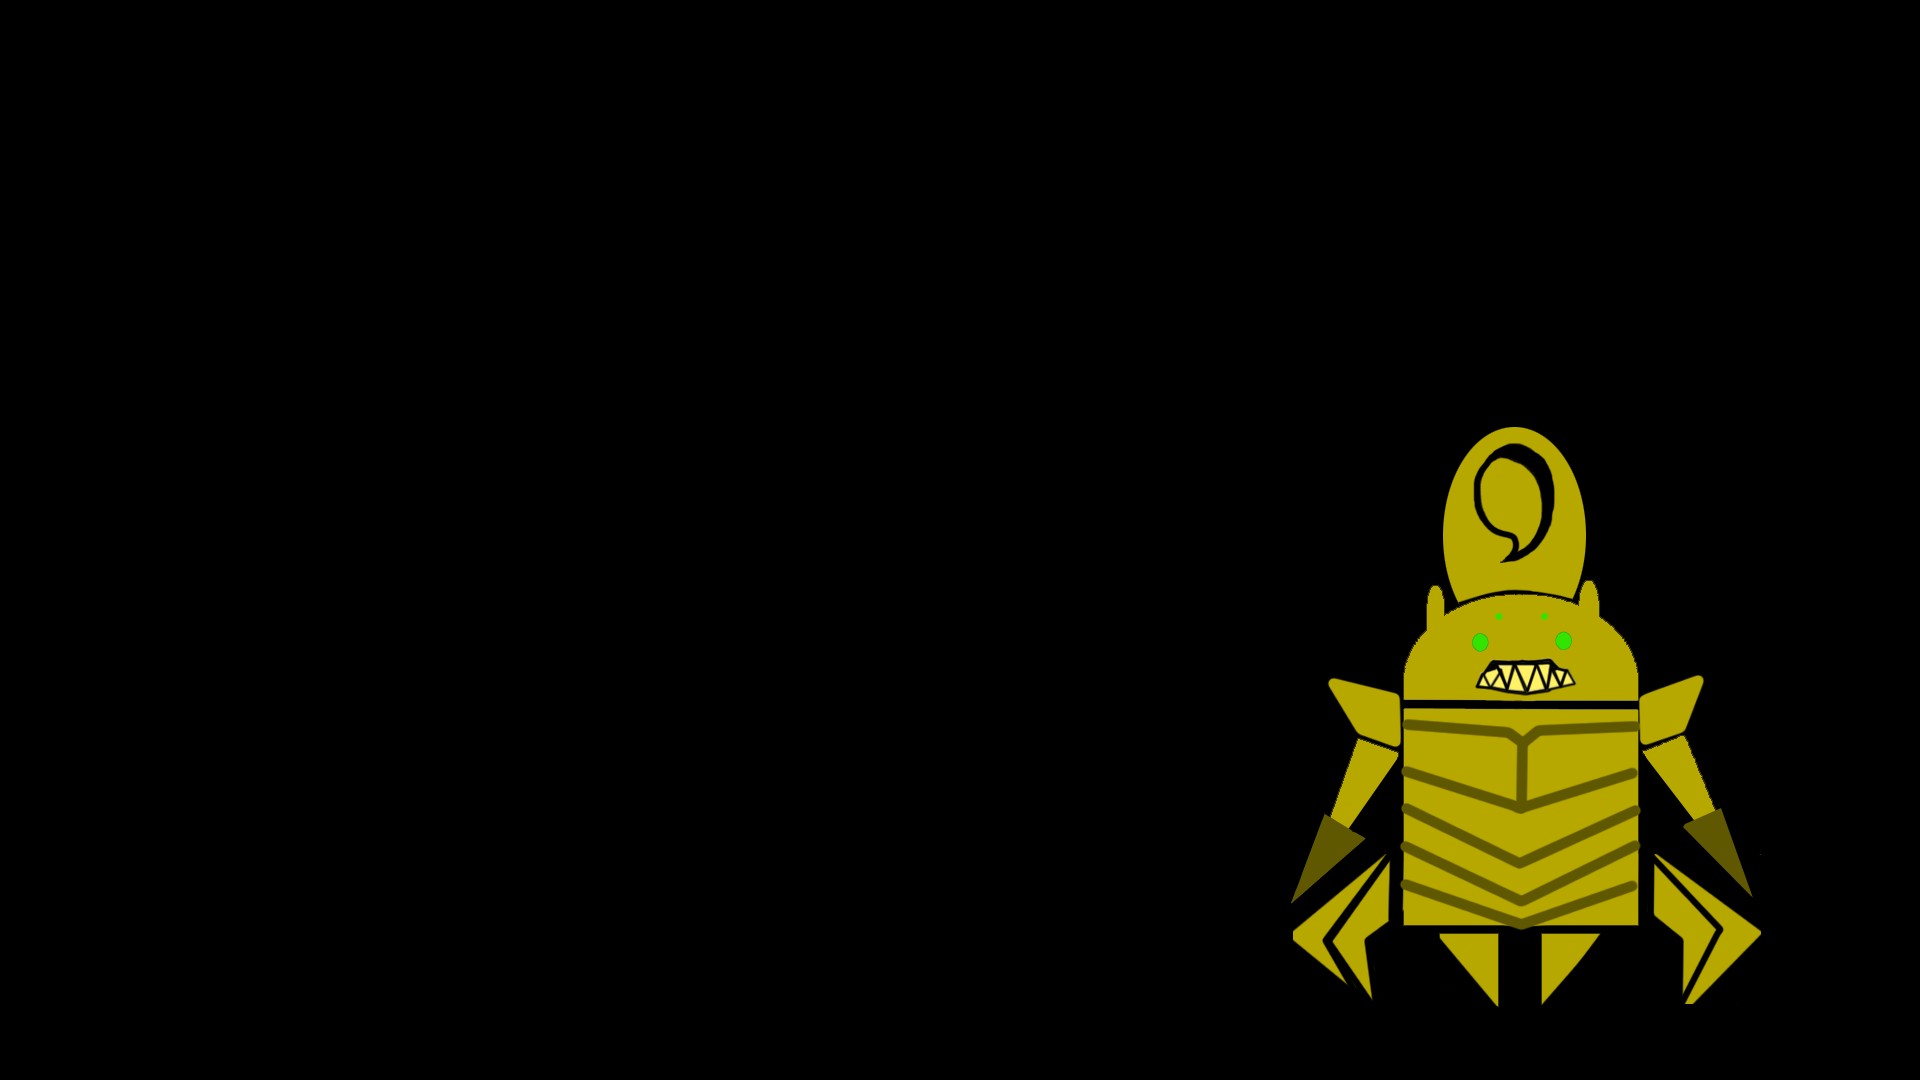 Sand King, Android (operating system), Microsoft Windows, Dota 2, Androidify Wallpaper